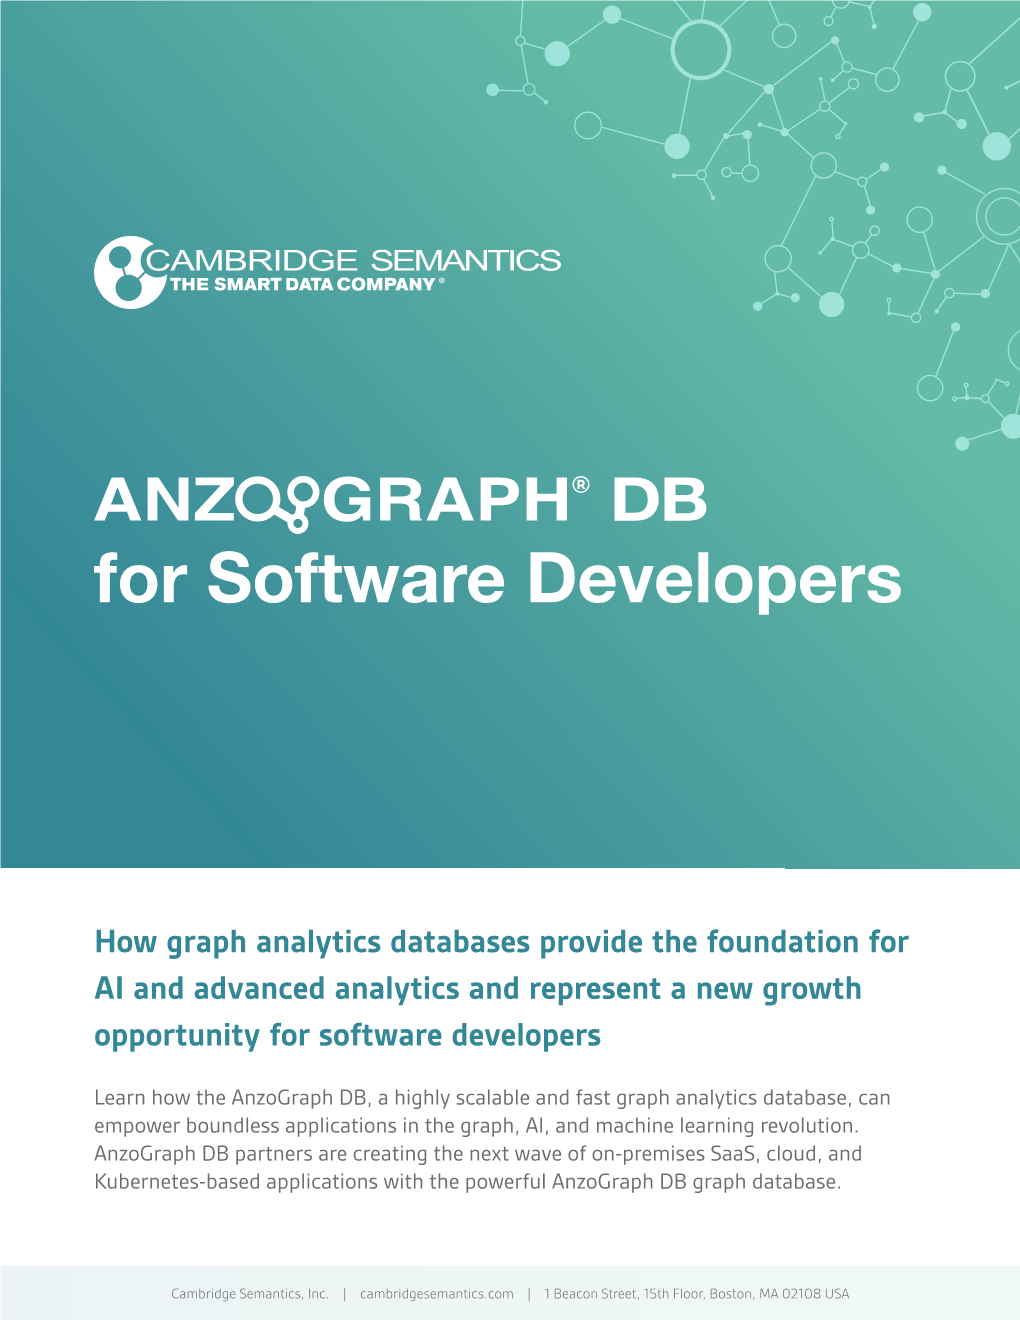 Anzograph DB for Software Developers